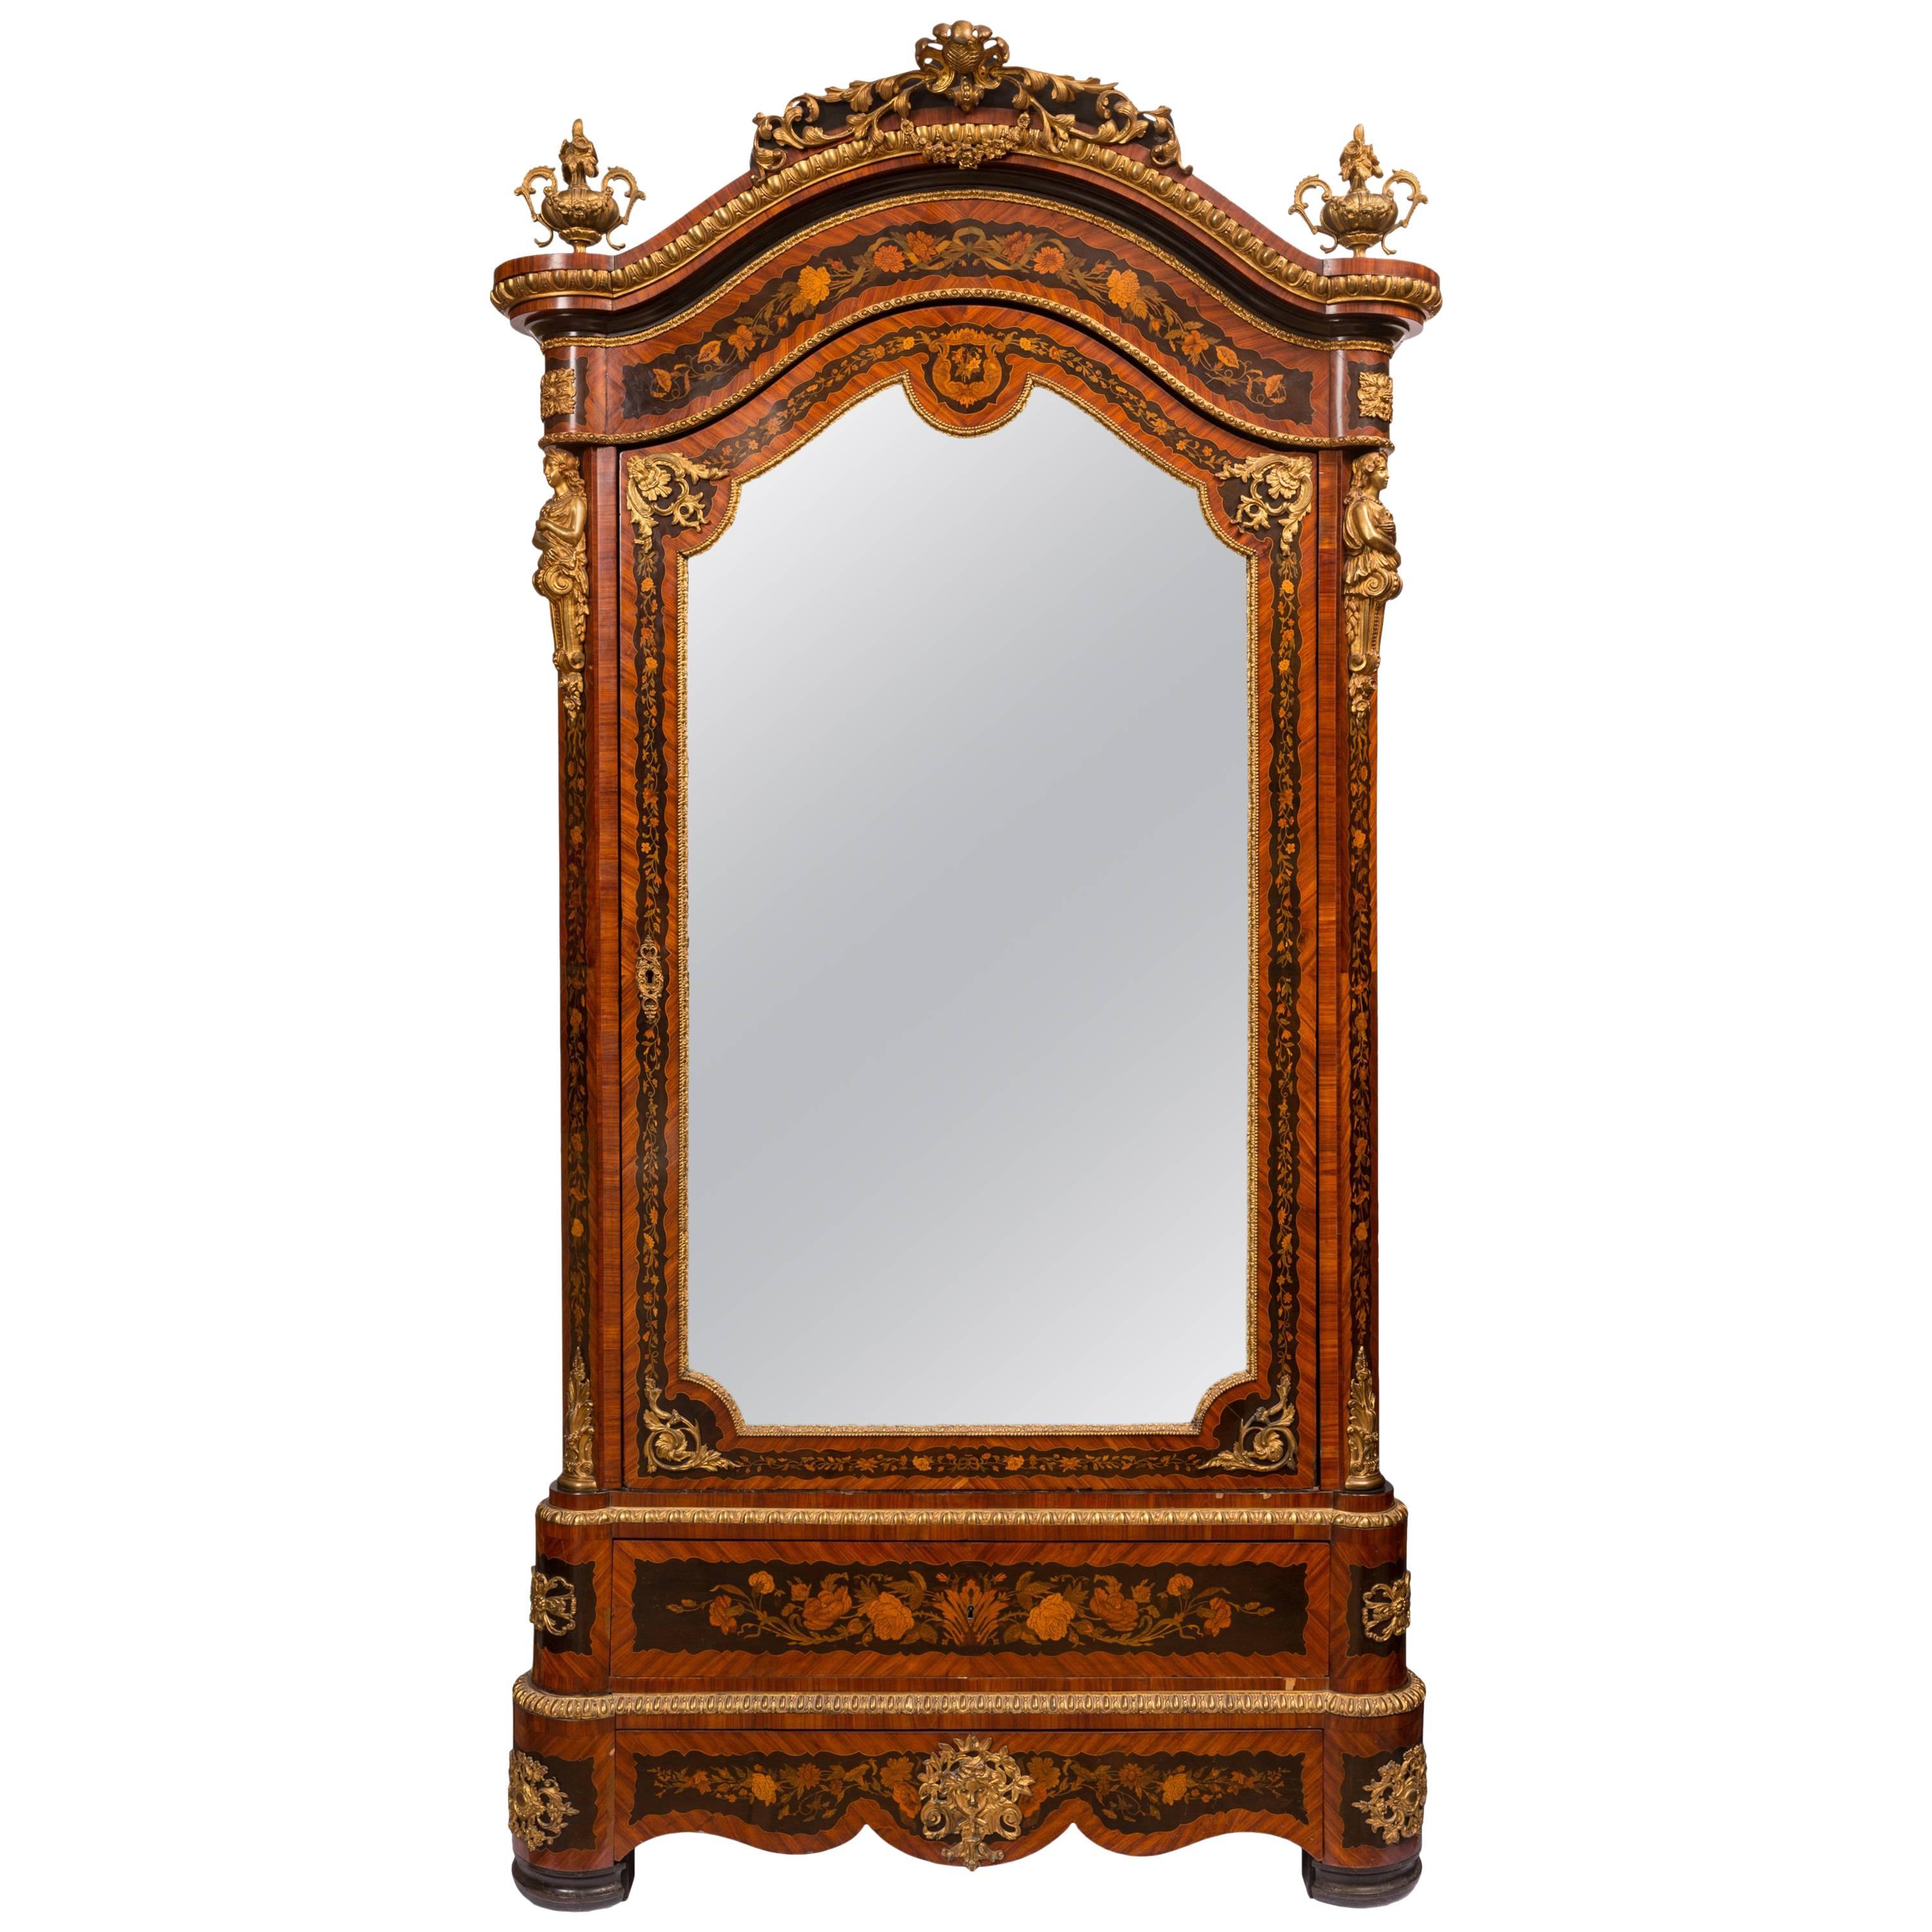 19th Century Louis XVI Style Mirror Front Armoire or Wardrobe with Marquetry